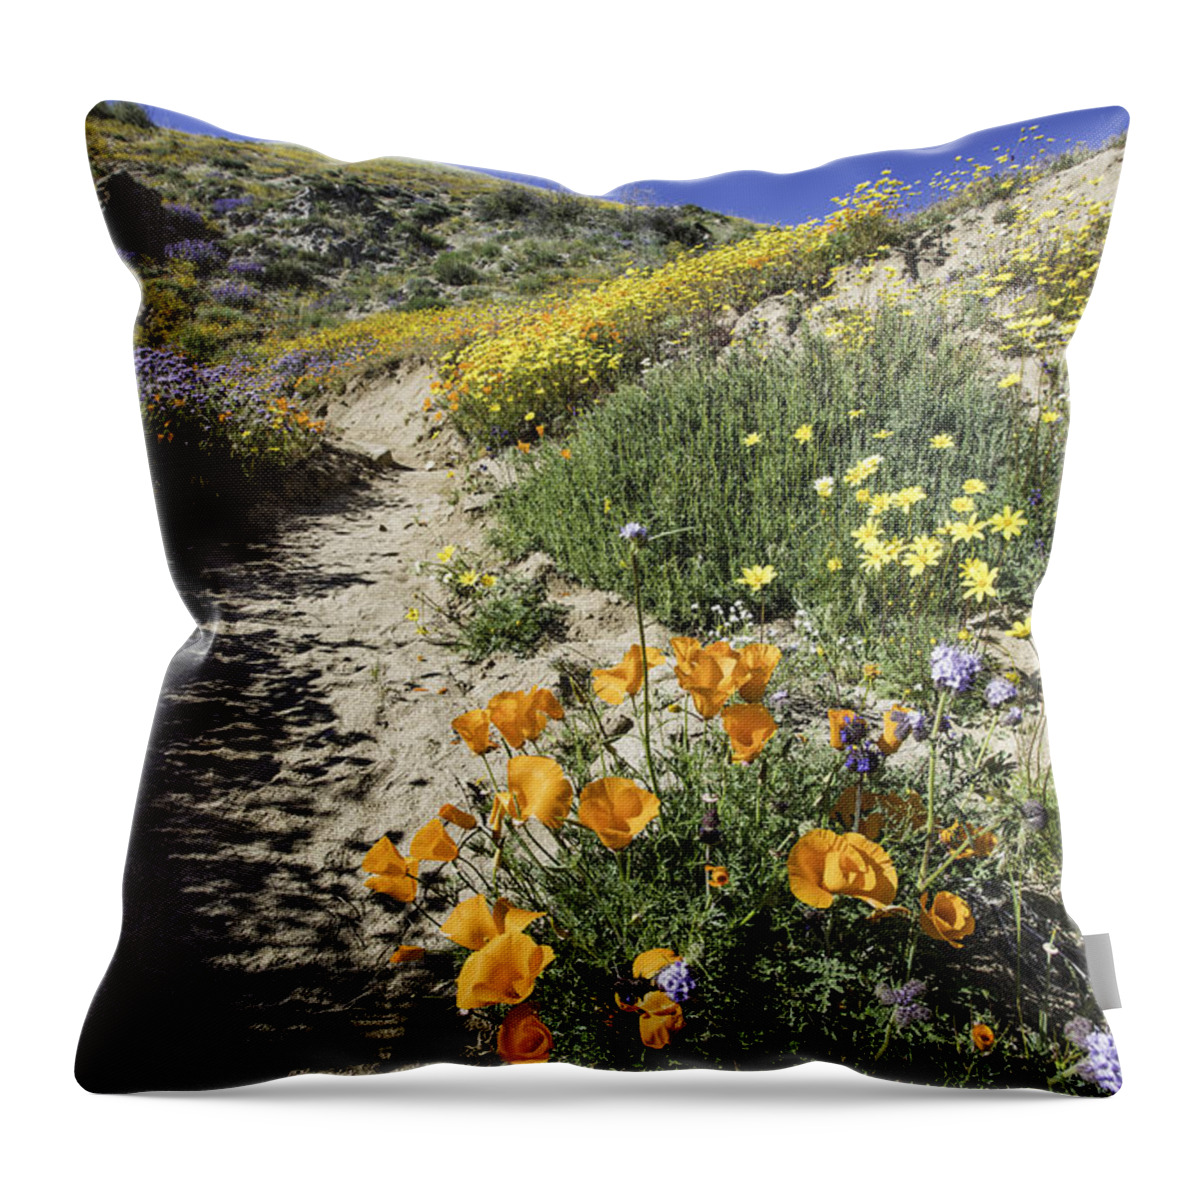 Landscape Throw Pillow featuring the photograph Wildflower Wash by Scott Cunningham